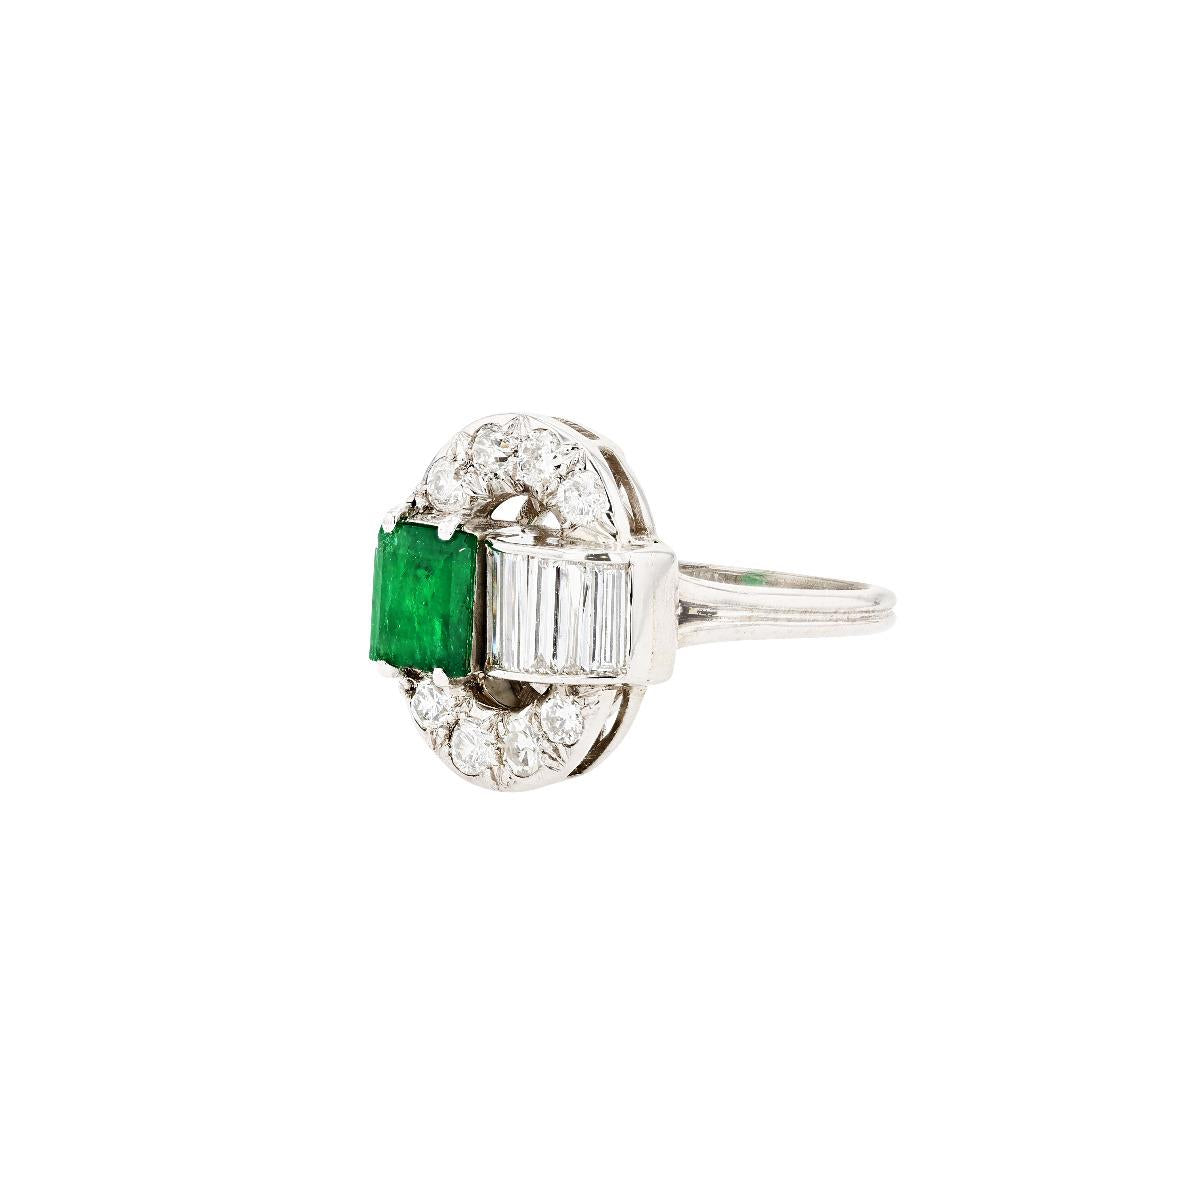 Vintage 14K White Gold Emerald And Diamond Ring